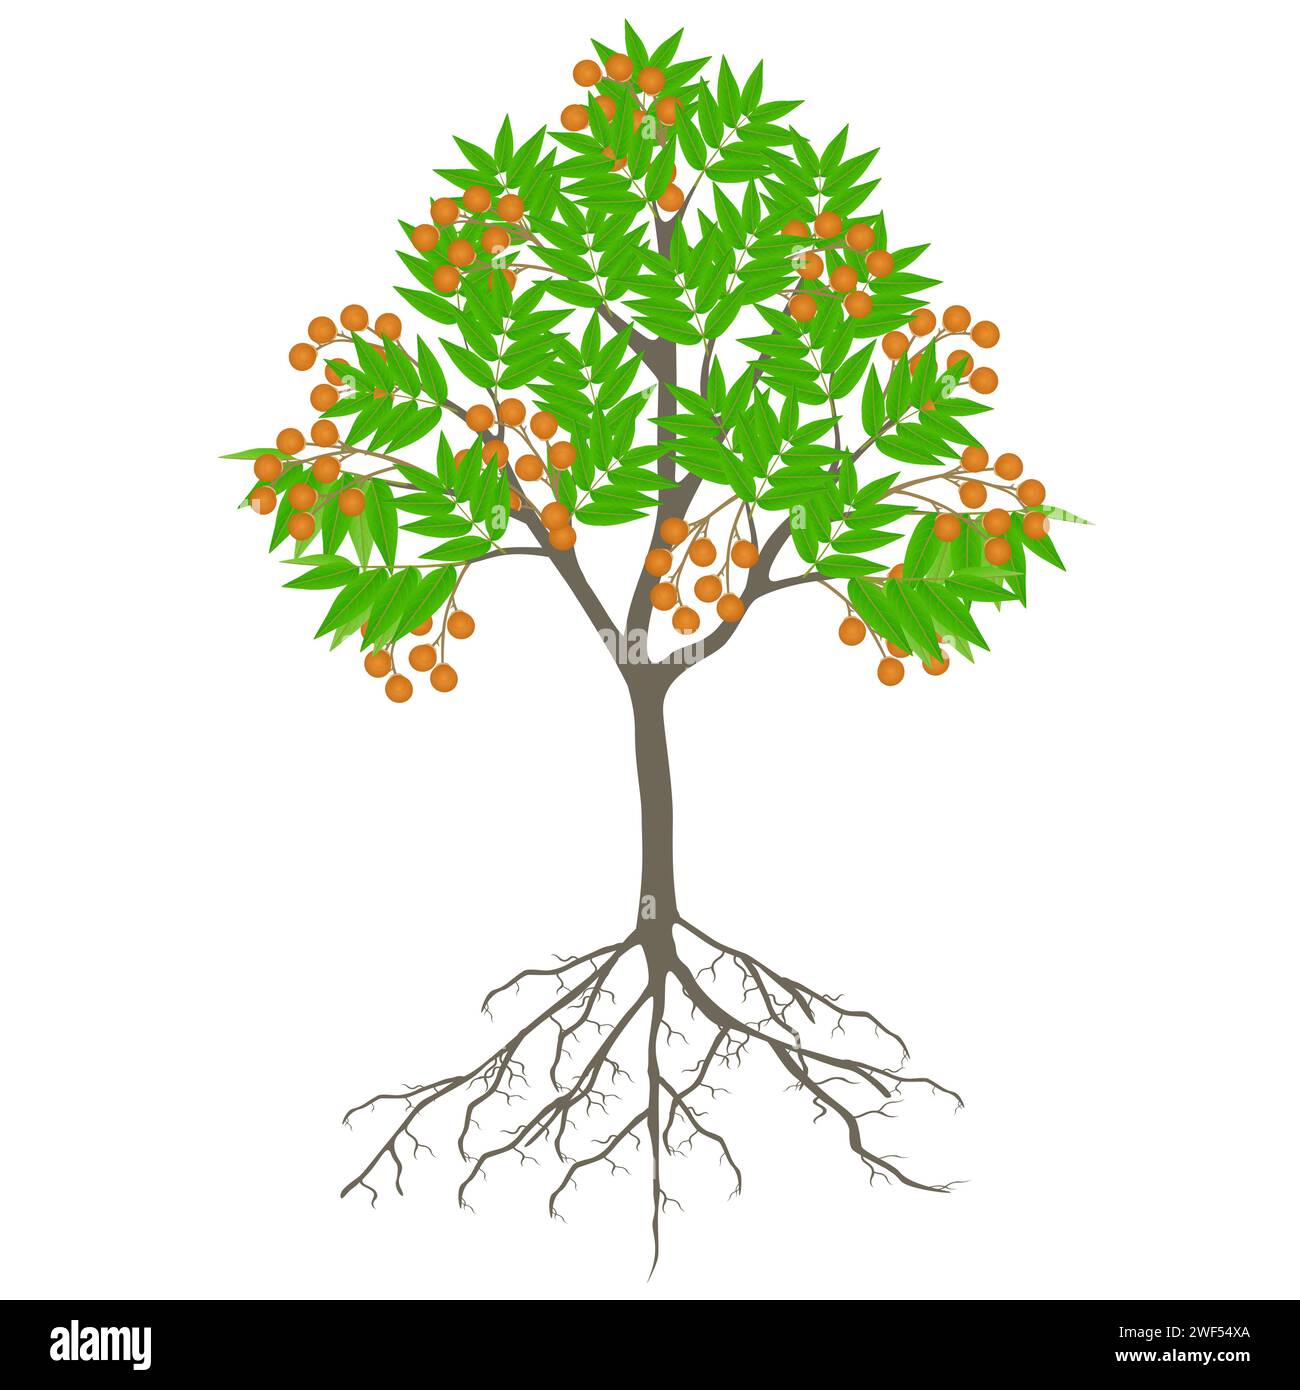 Sapindus soap tree with fruits on a white background. Stock Vector